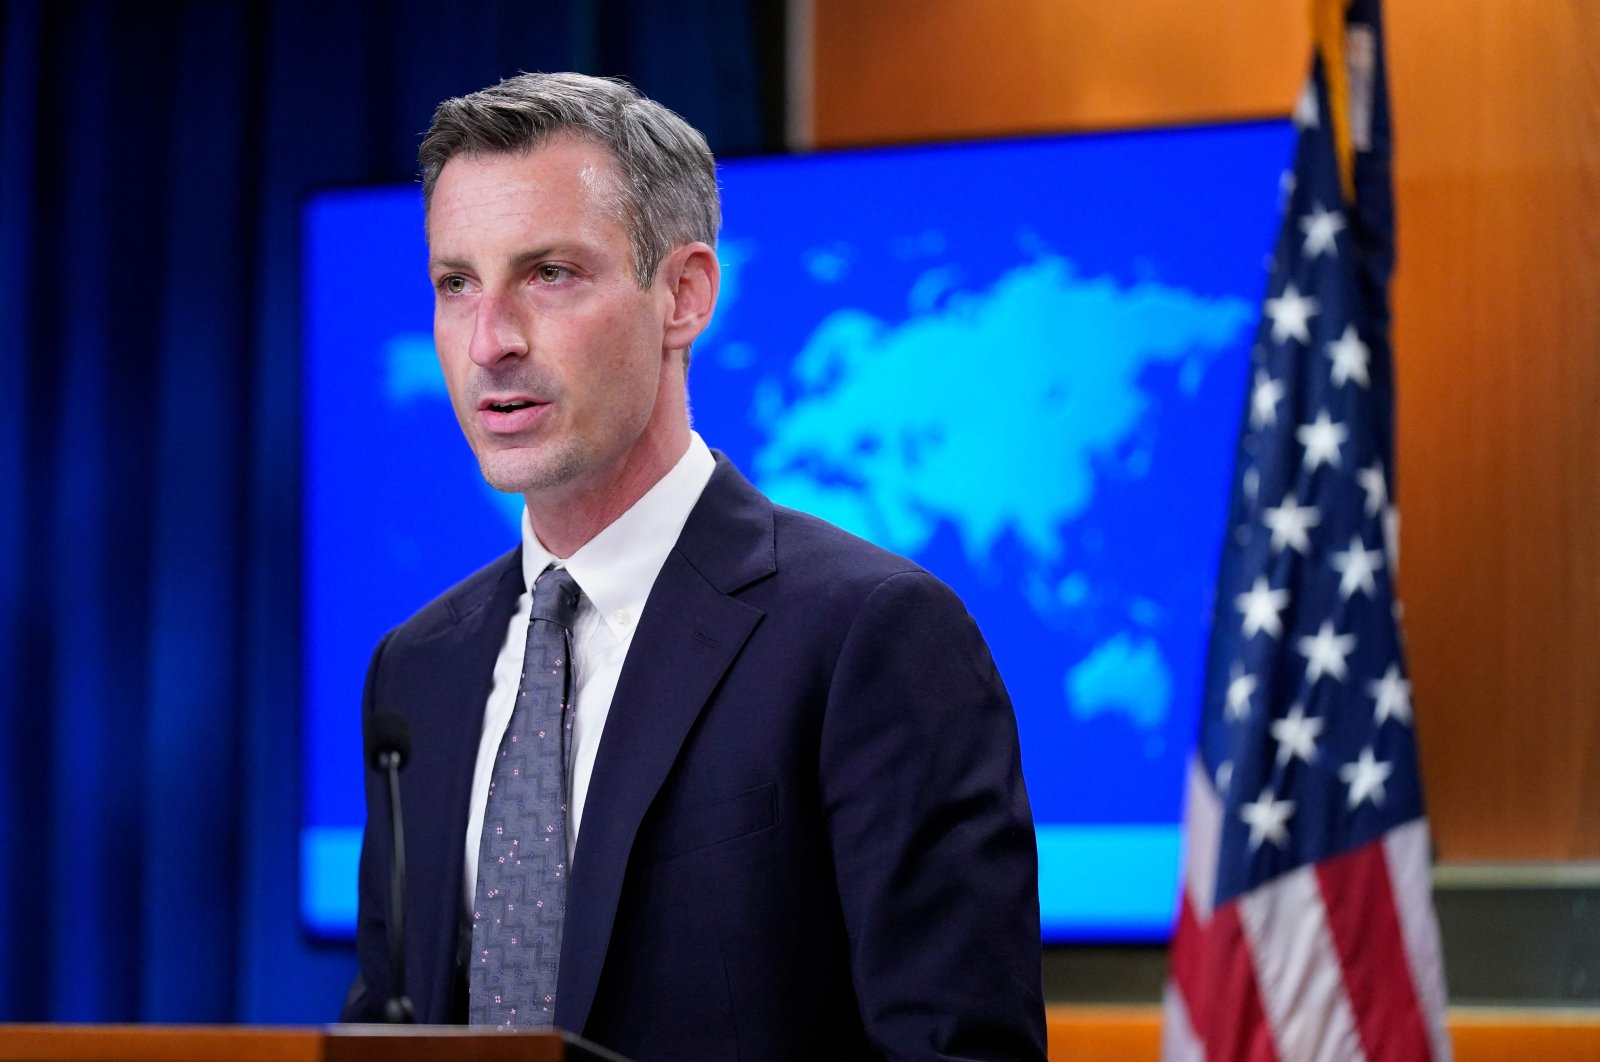 State Department spokesperson Ned Price speaks during a press briefing at the US State Department in Washington, DC, on January 24, 2022. (Photo by Patrick Semansky / POOL / AFP)